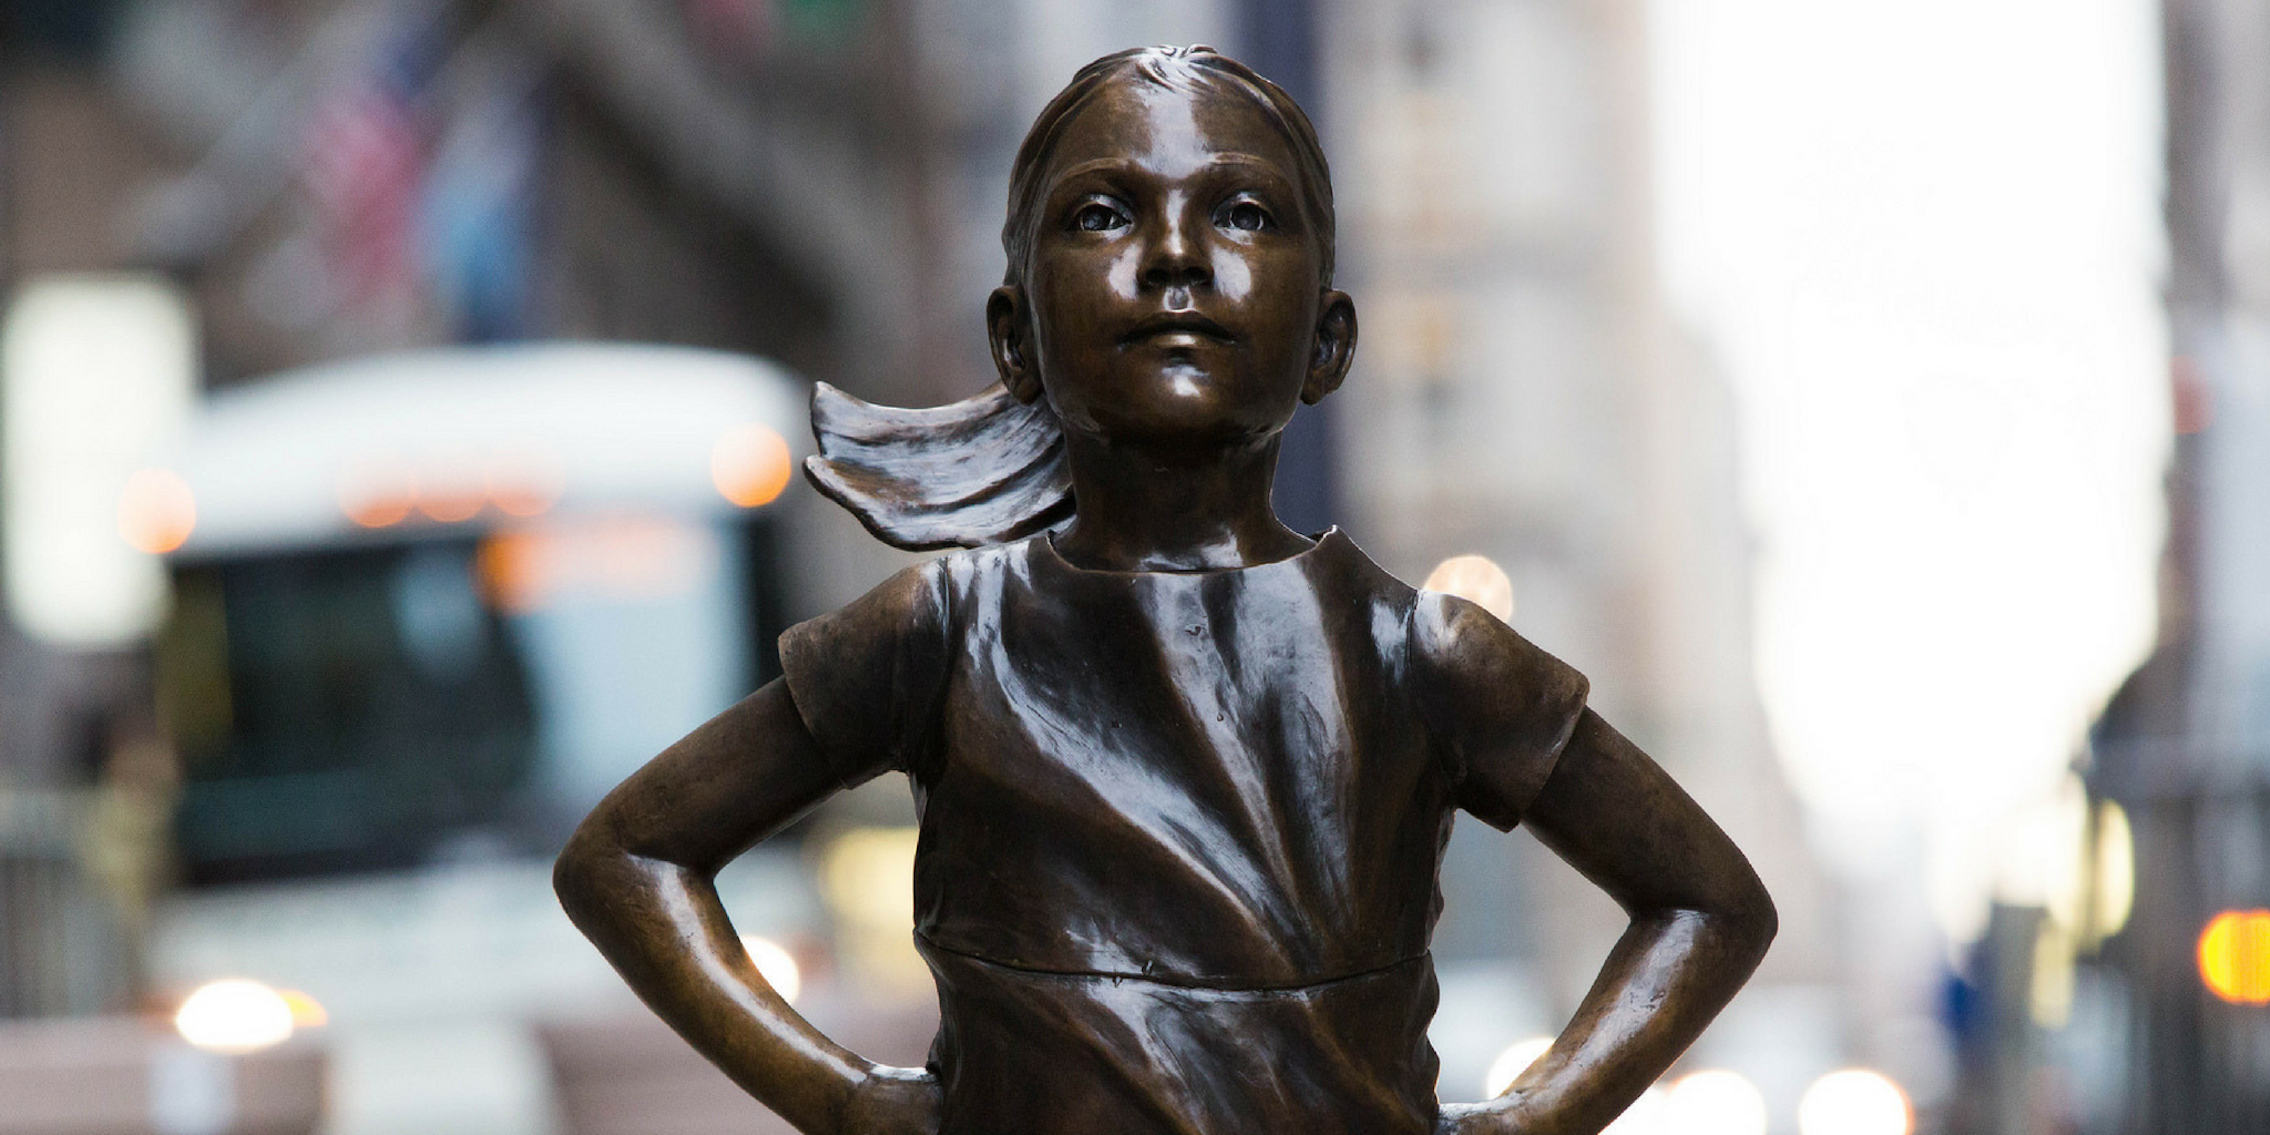 The Fearless Girl statue on Wall Street